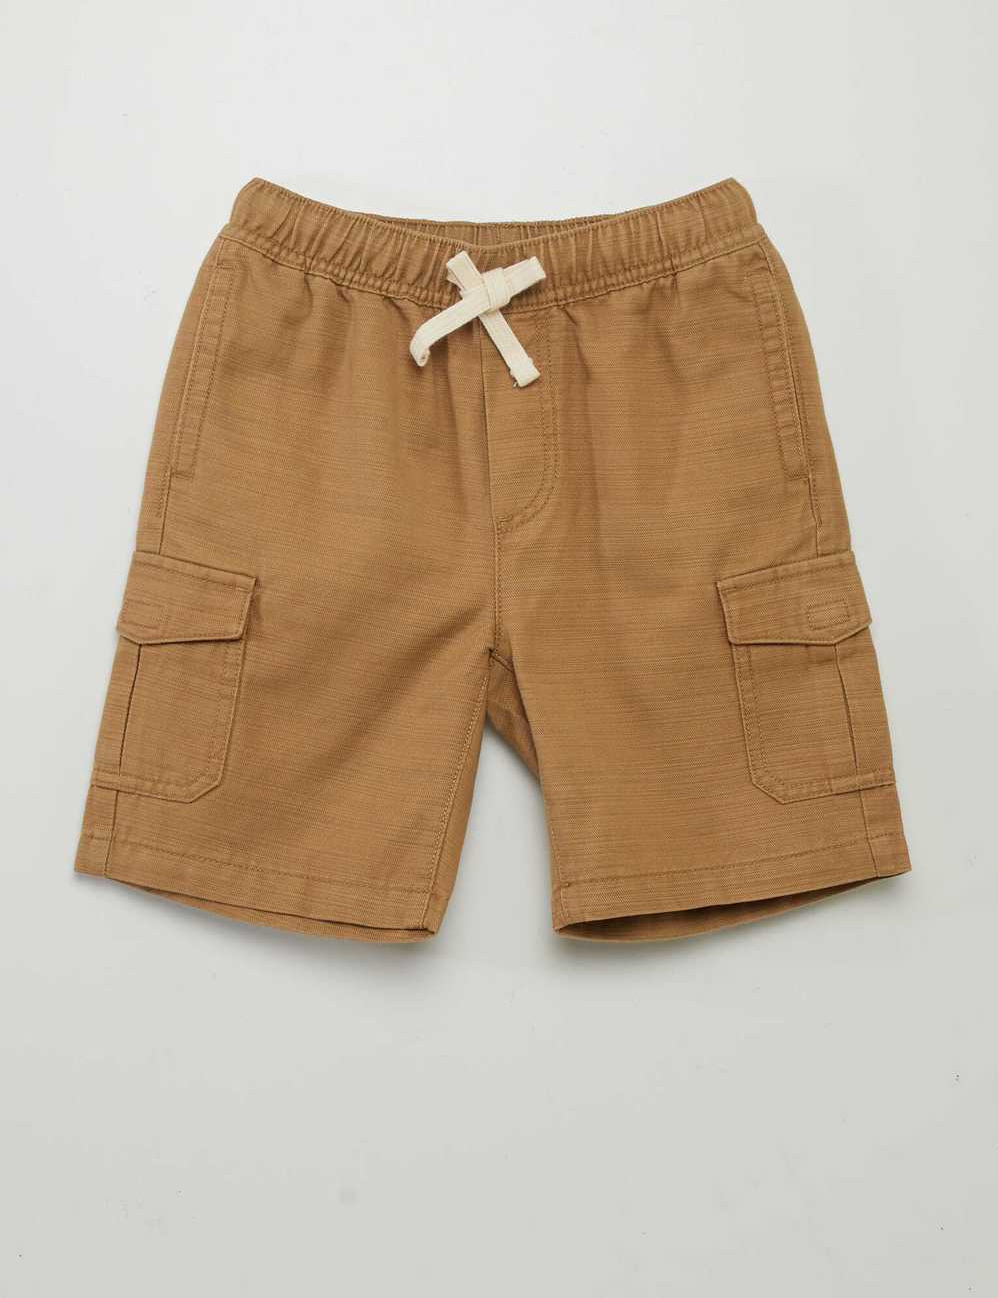 Bermuda shorts with side pockets